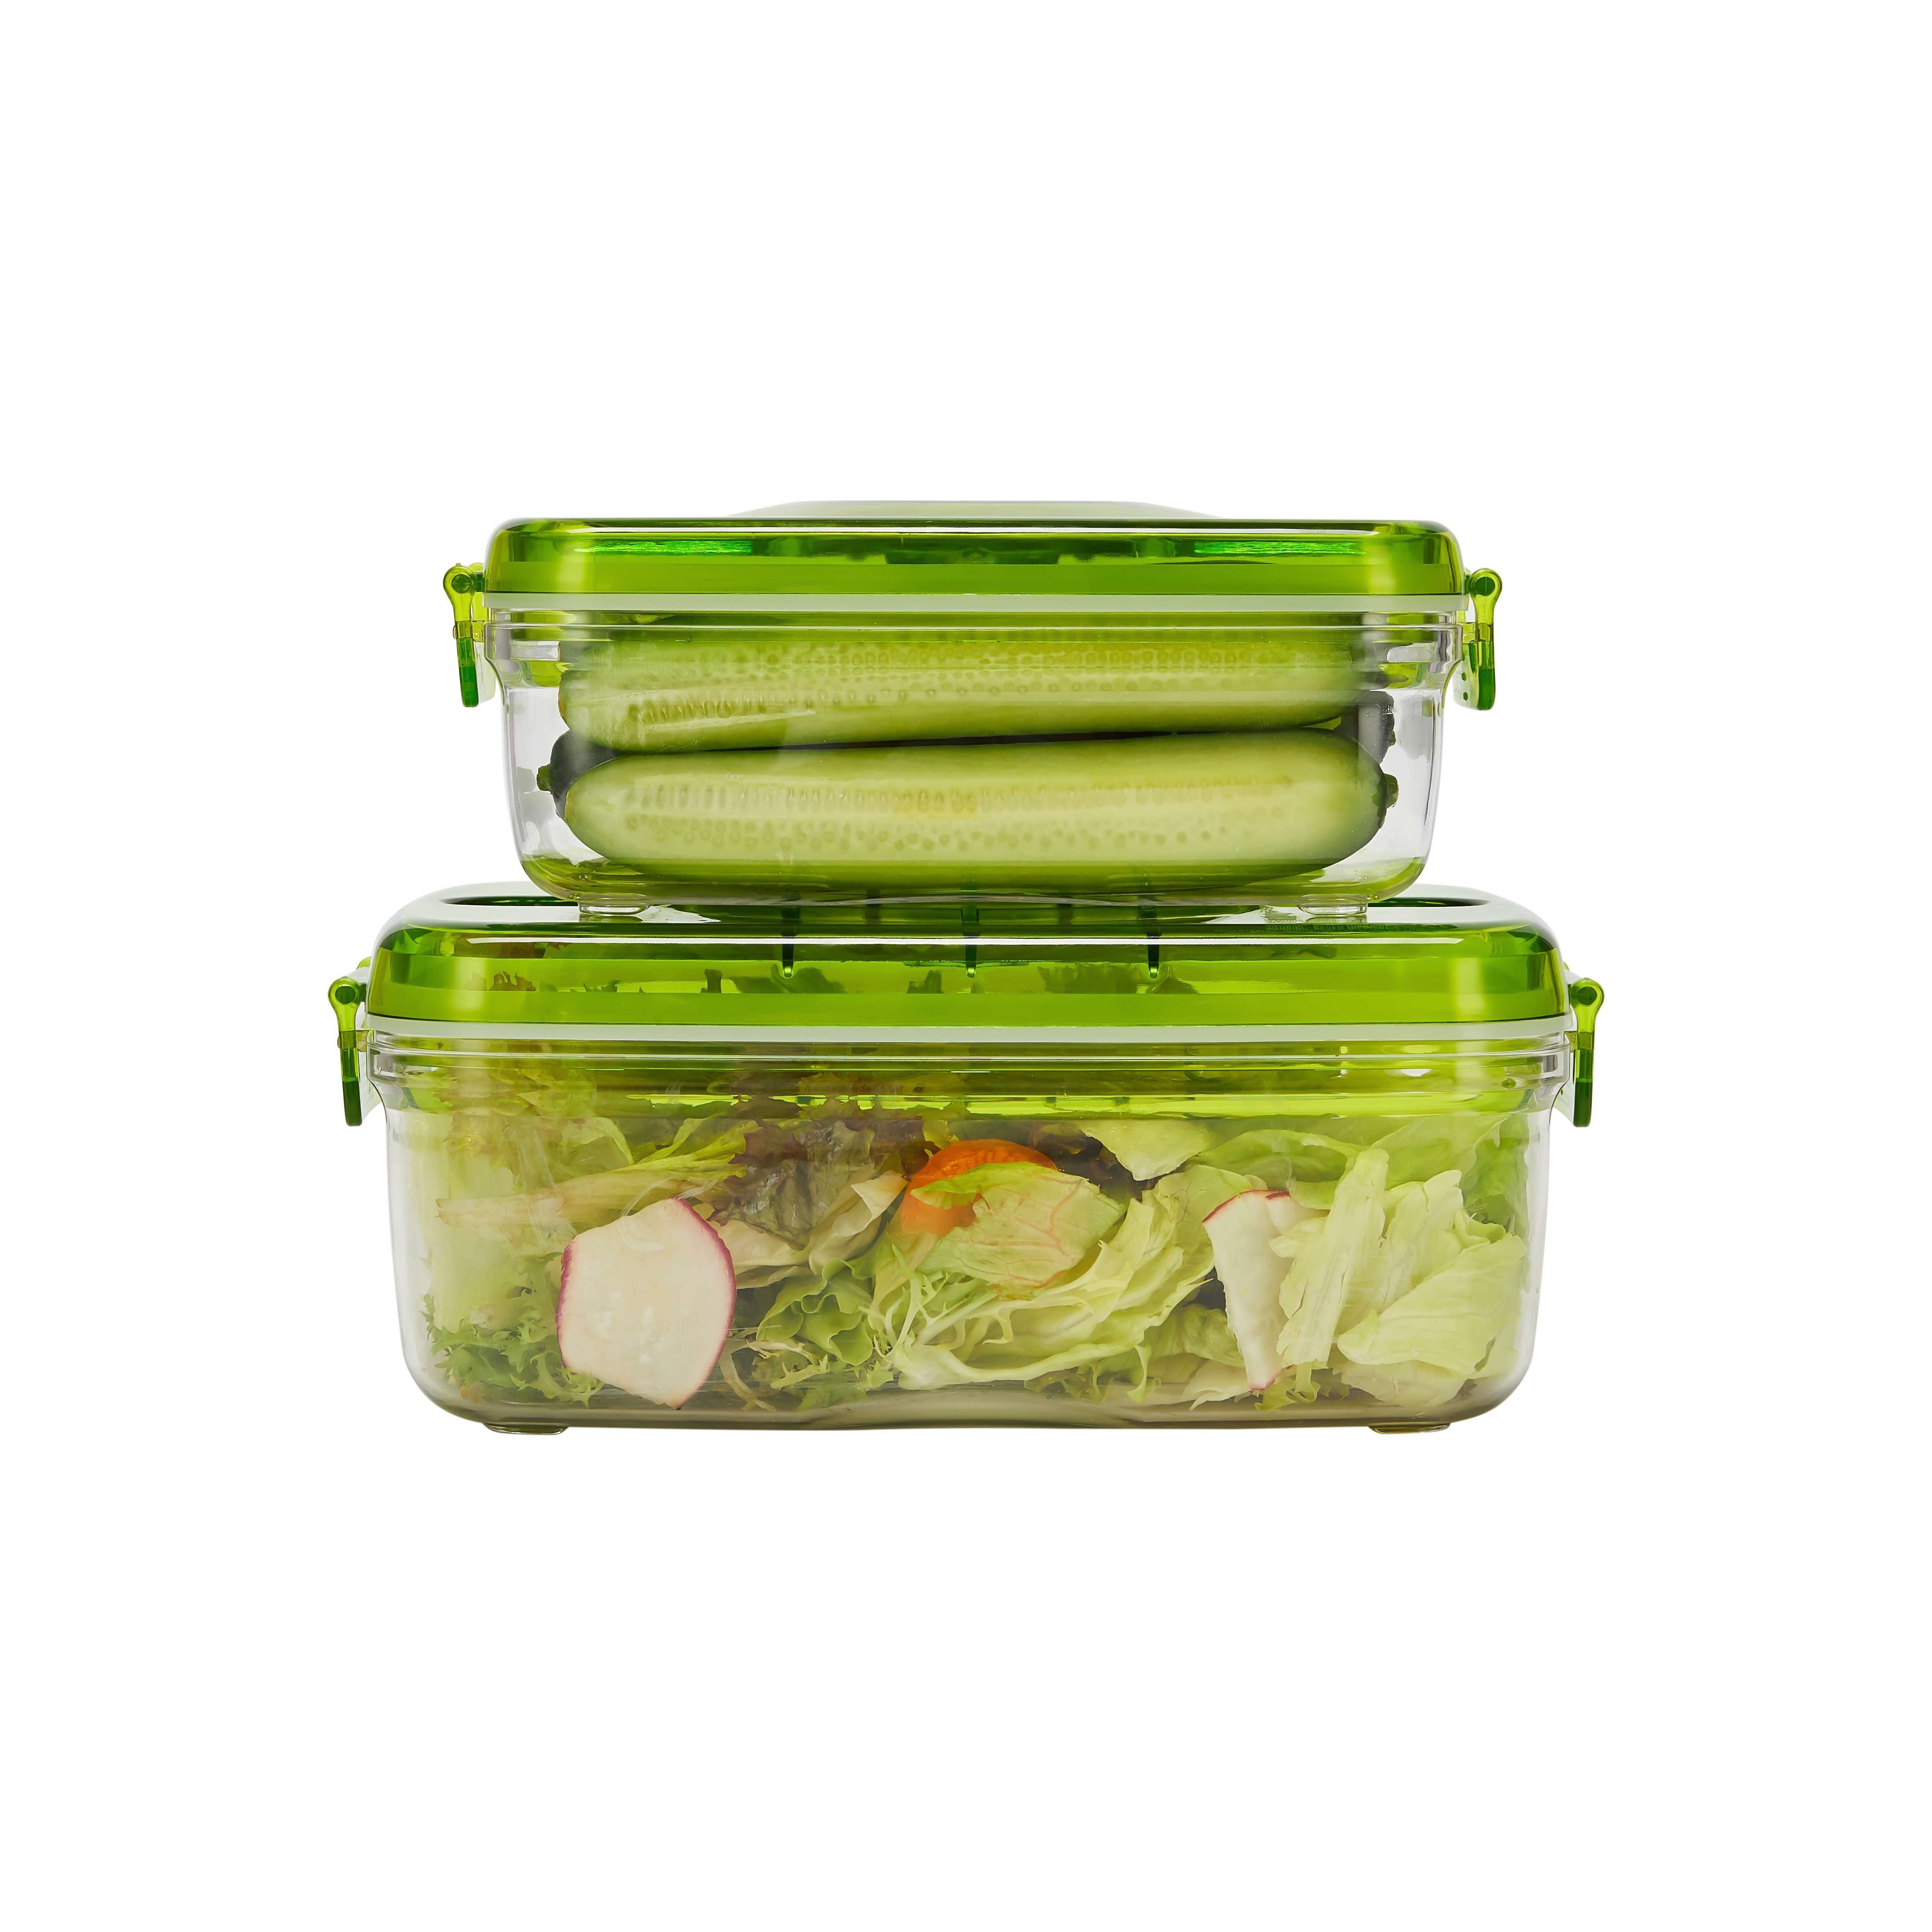 

Vacuum Seal Food Storage Container Set - Lunch Box - For Vegetables, Fruits, Meal Prep, Marinating Meat - Bpa Free - Dishwasher, Freezer & Microwave Safe